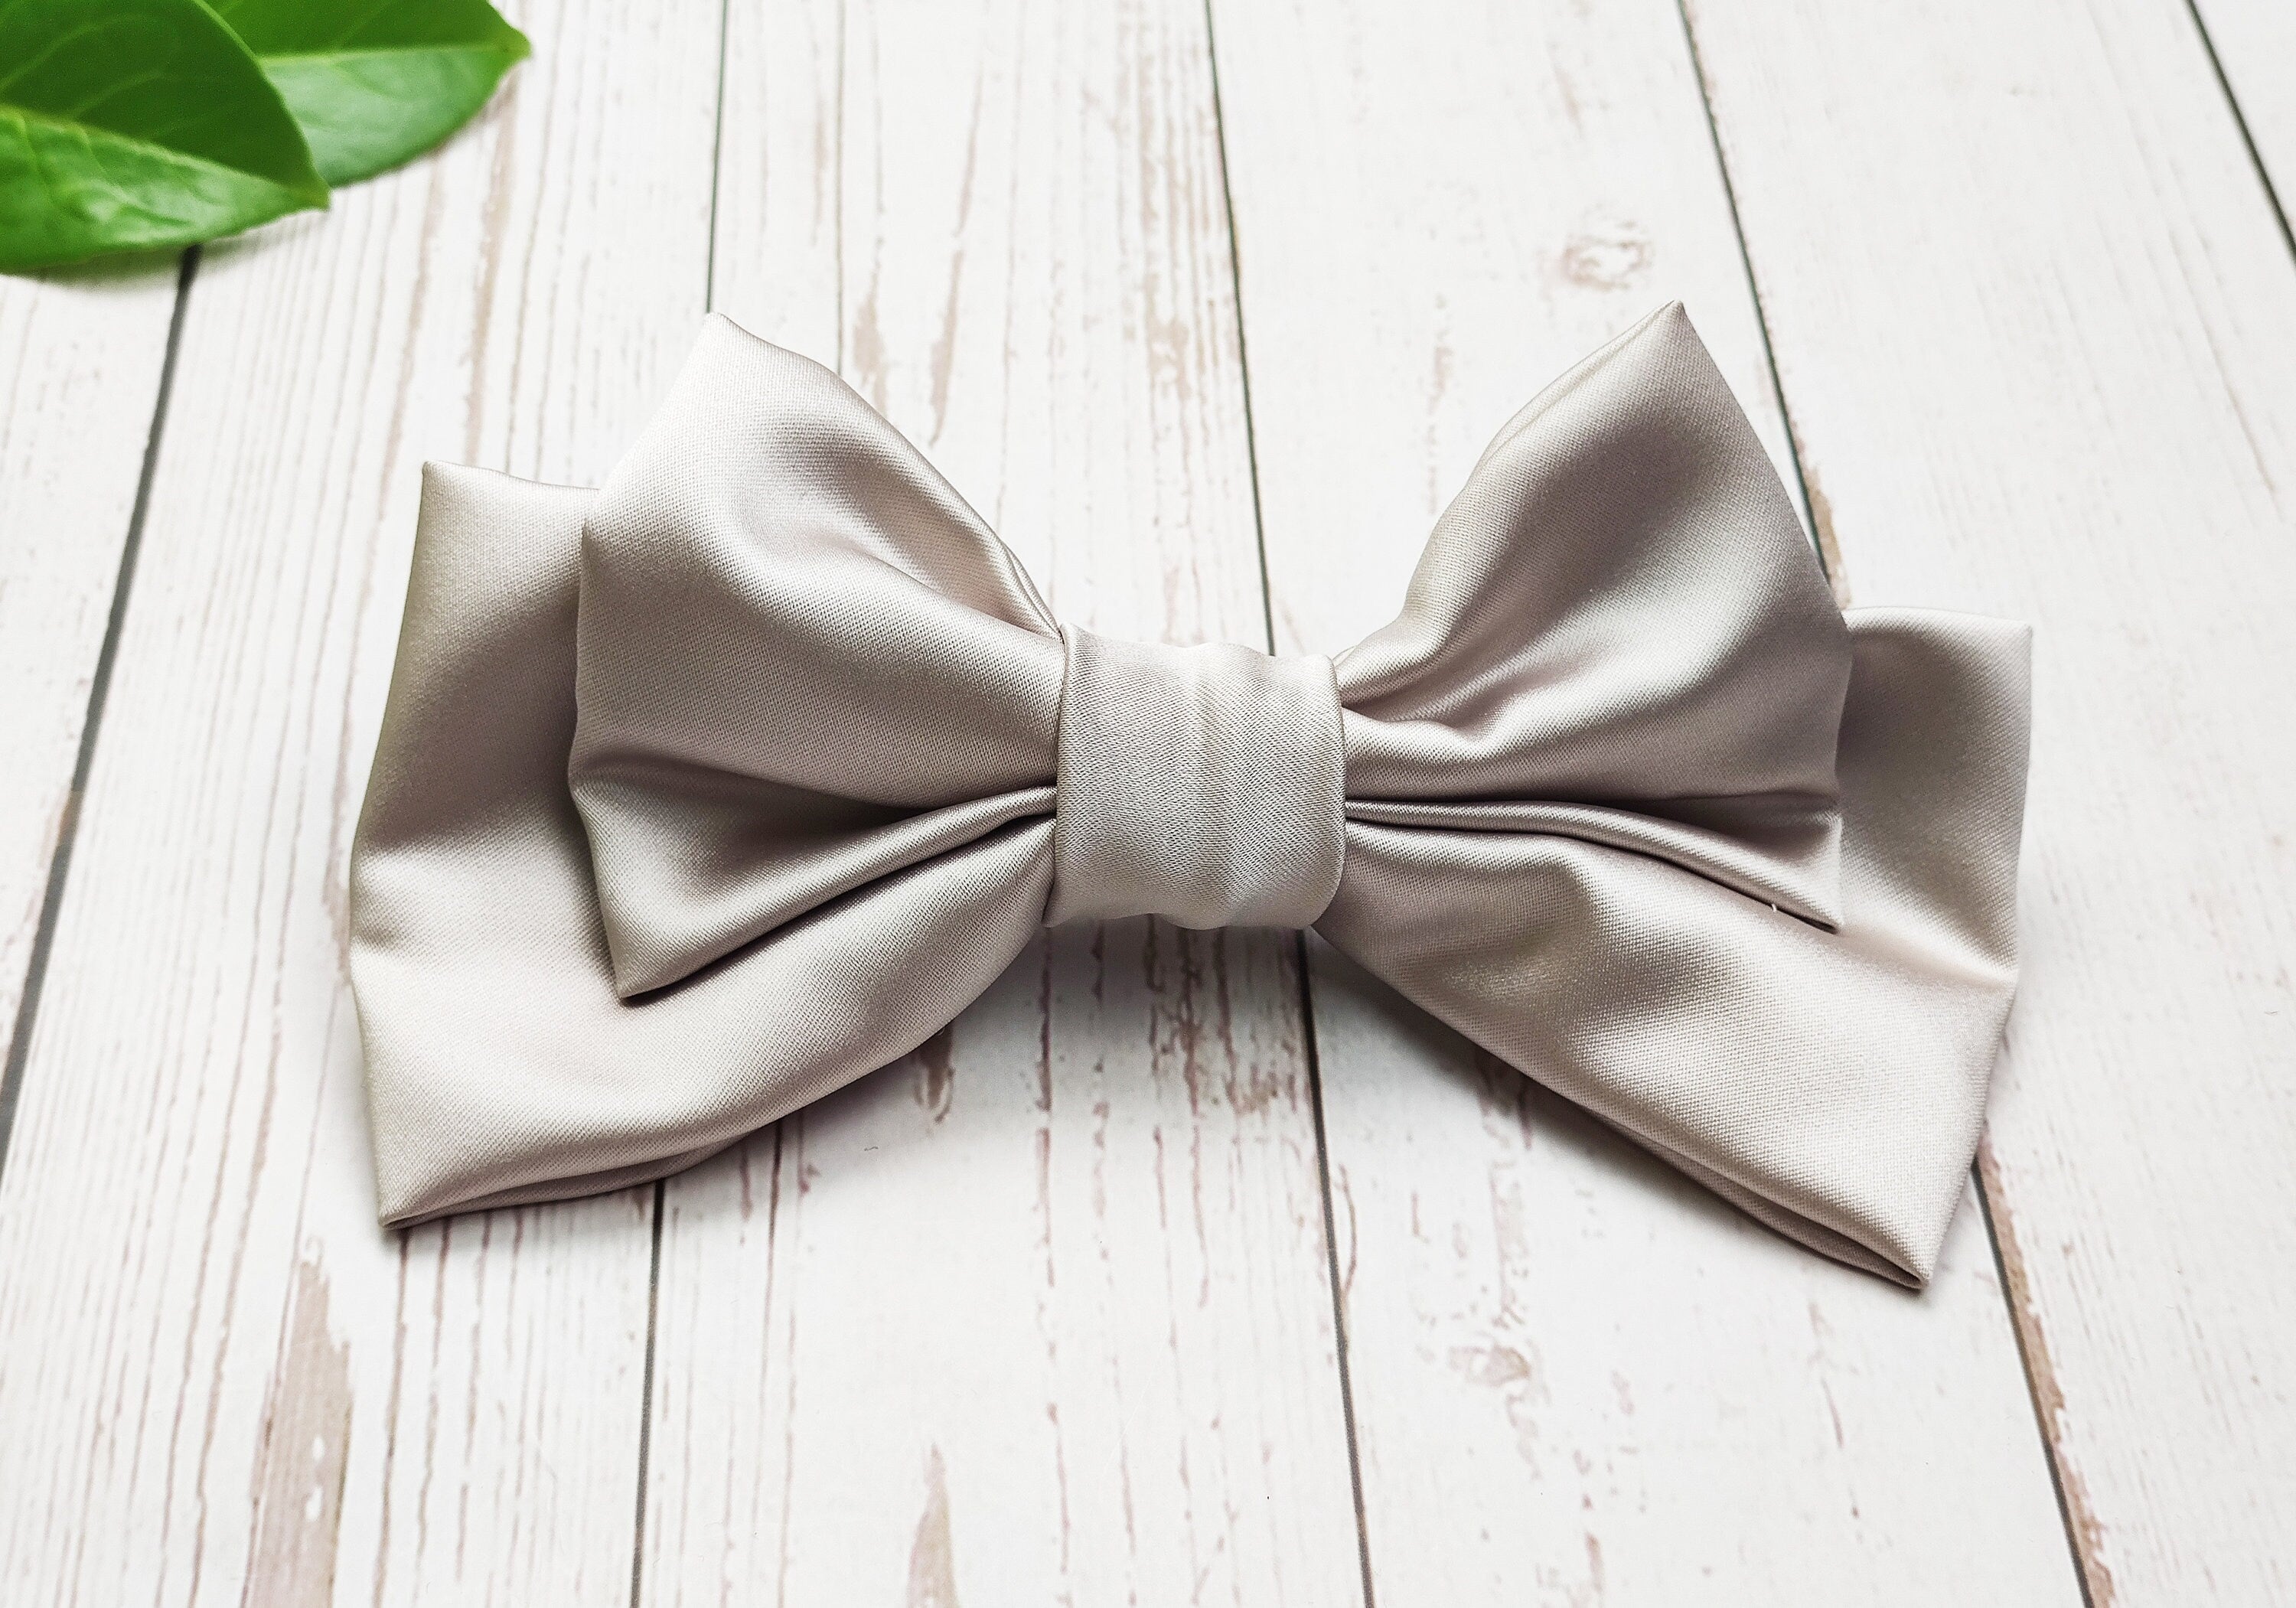 Stay comfortable and on-trend with these handmade brick and beige satin hair clips with a bow. The fashionable design and soft satin material make them a versatile choice for any occasion.